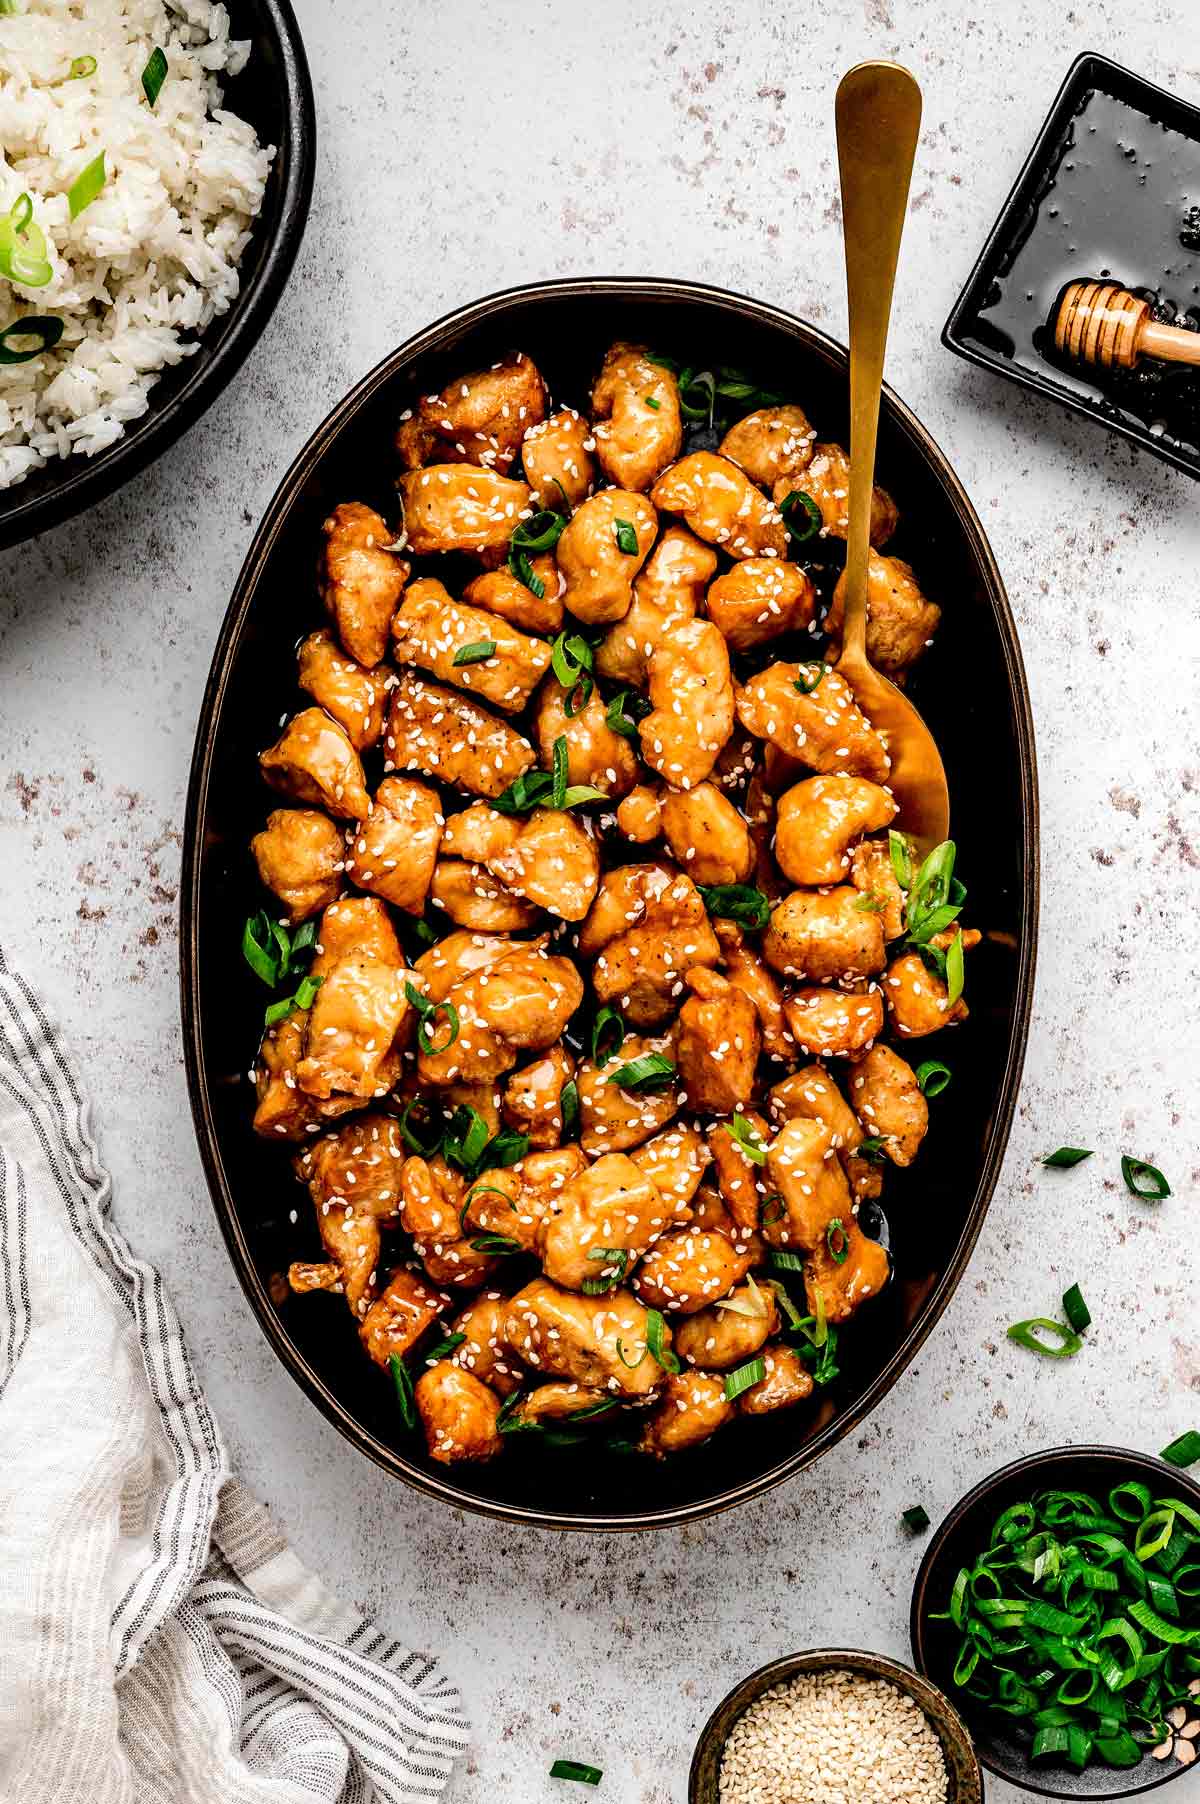 Crispy honey sesame chicken pieces in an oval serving dish with a spoon.